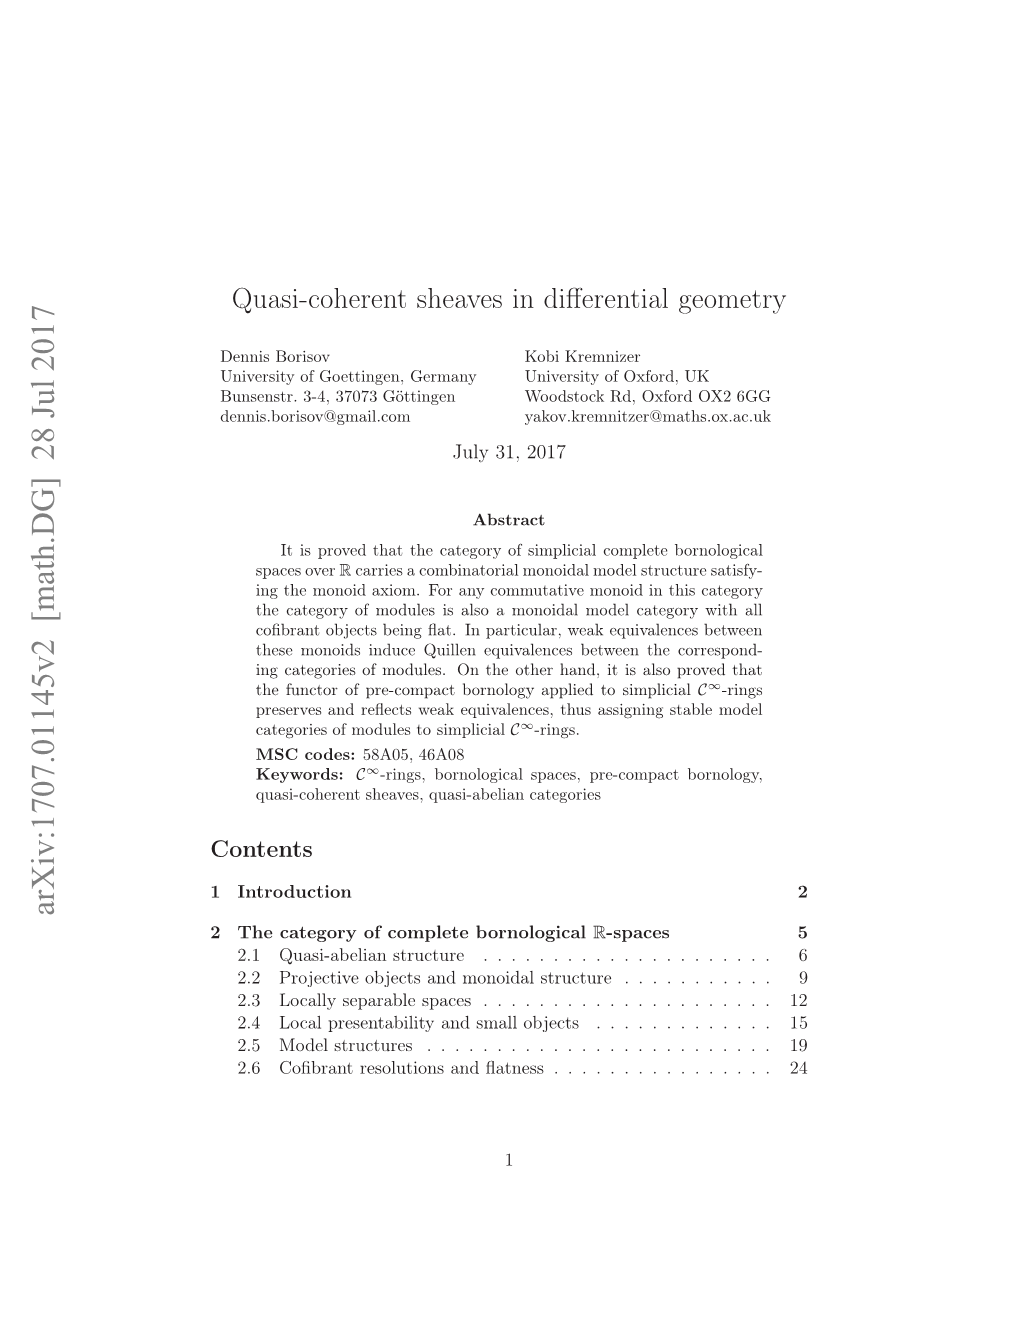 Quasi-Coherent Sheaves in Differential Geometry